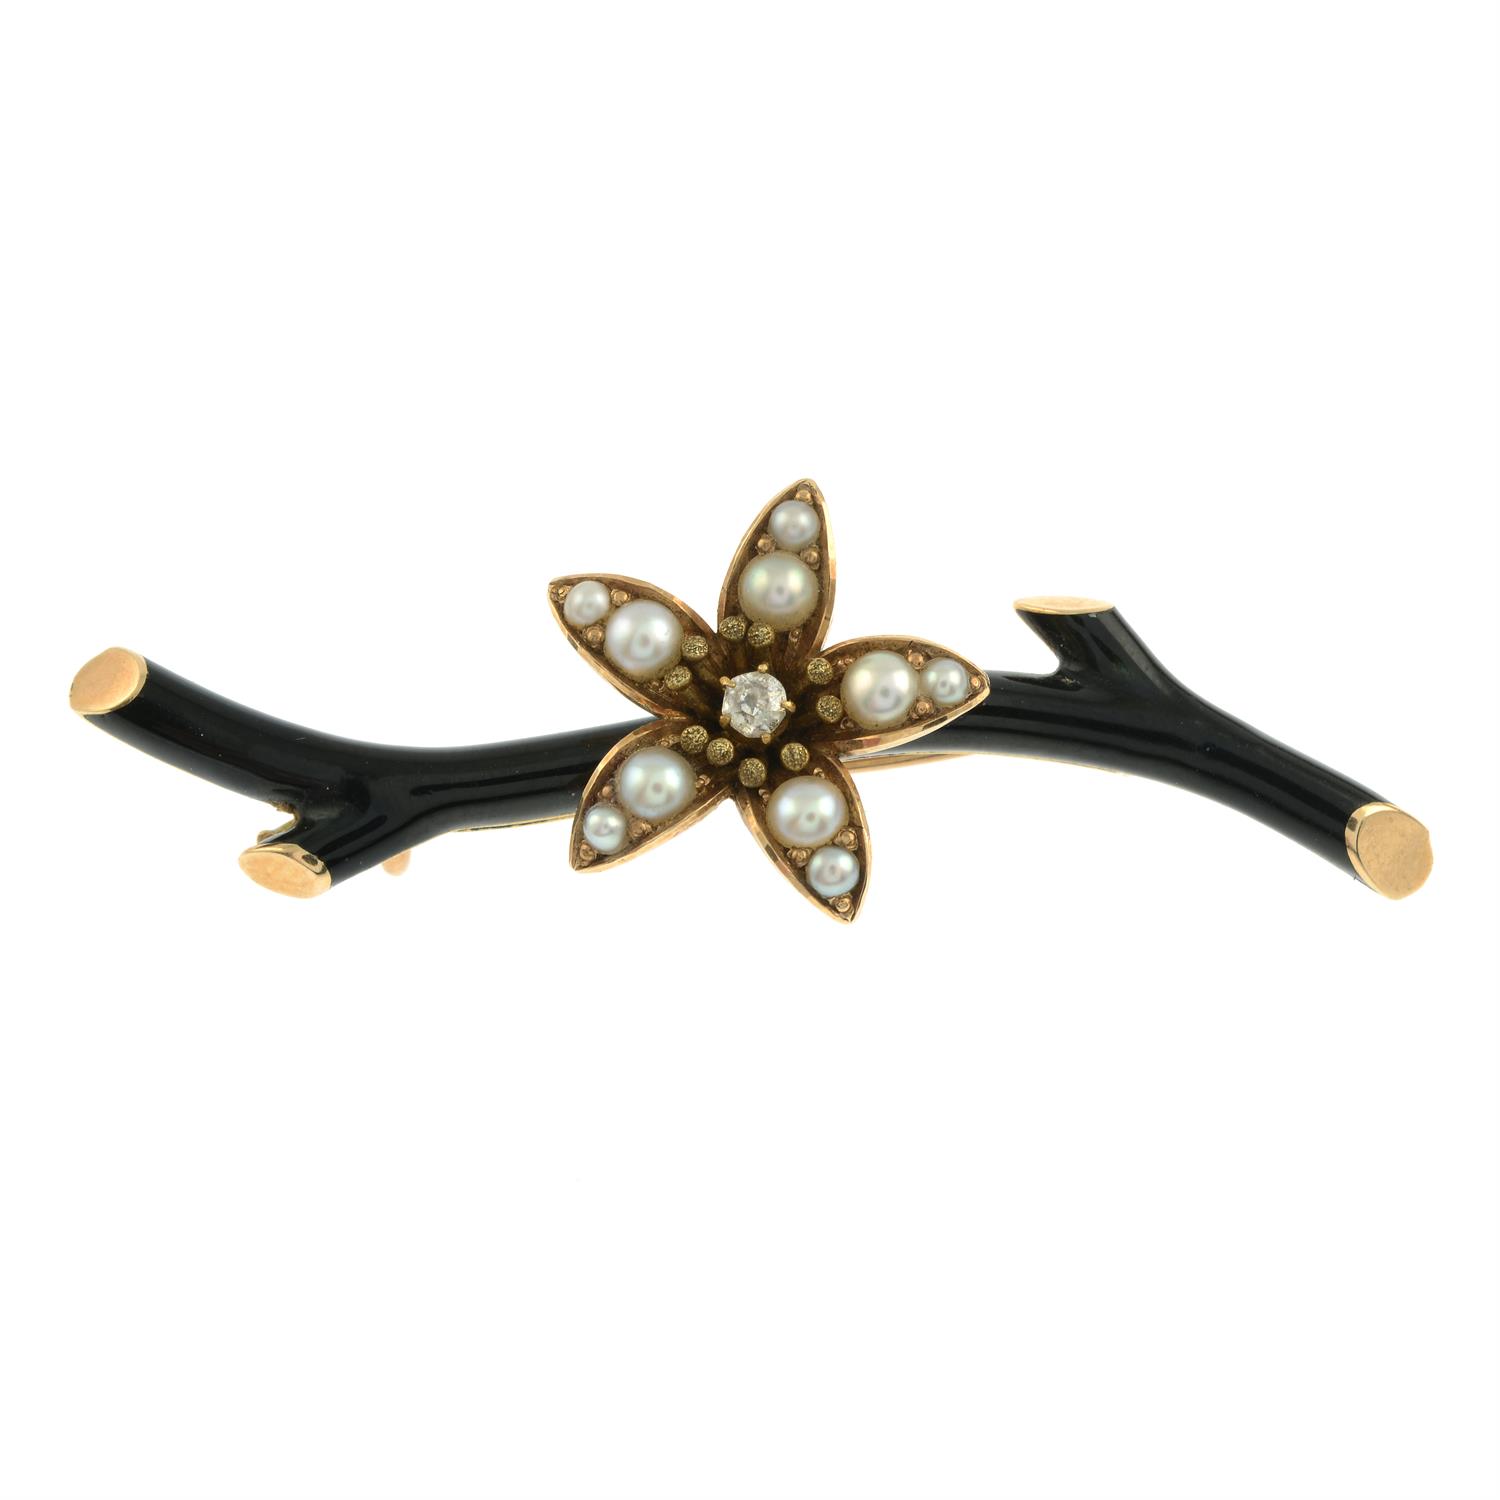 A late 19th century 14ct gold old-cut diamond and split pearl flowering black enamel branch brooch. - Image 2 of 4